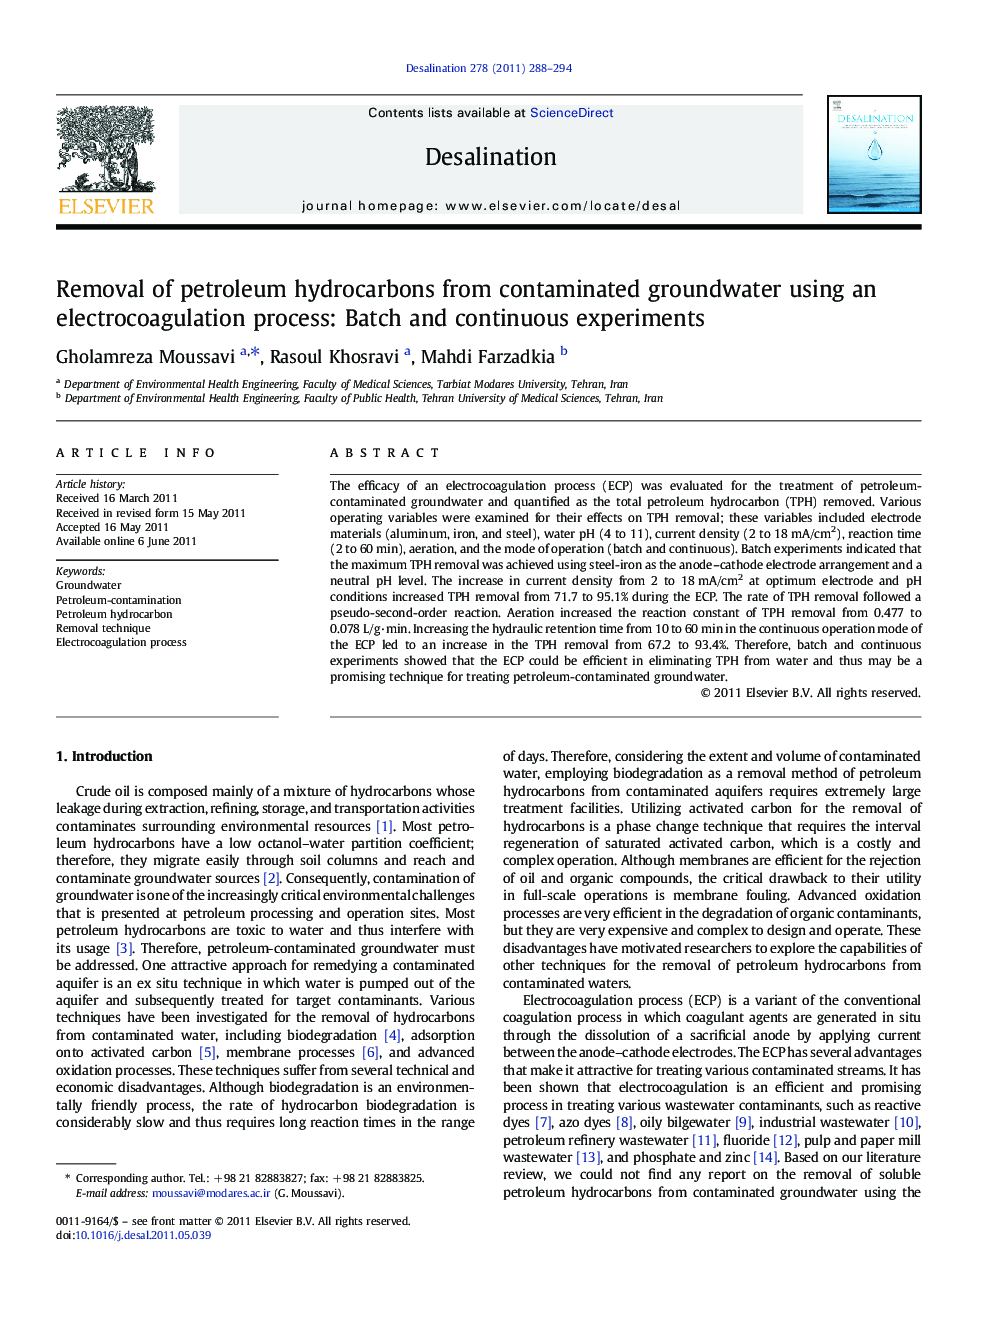 Removal of petroleum hydrocarbons from contaminated groundwater using an electrocoagulation process: Batch and continuous experiments